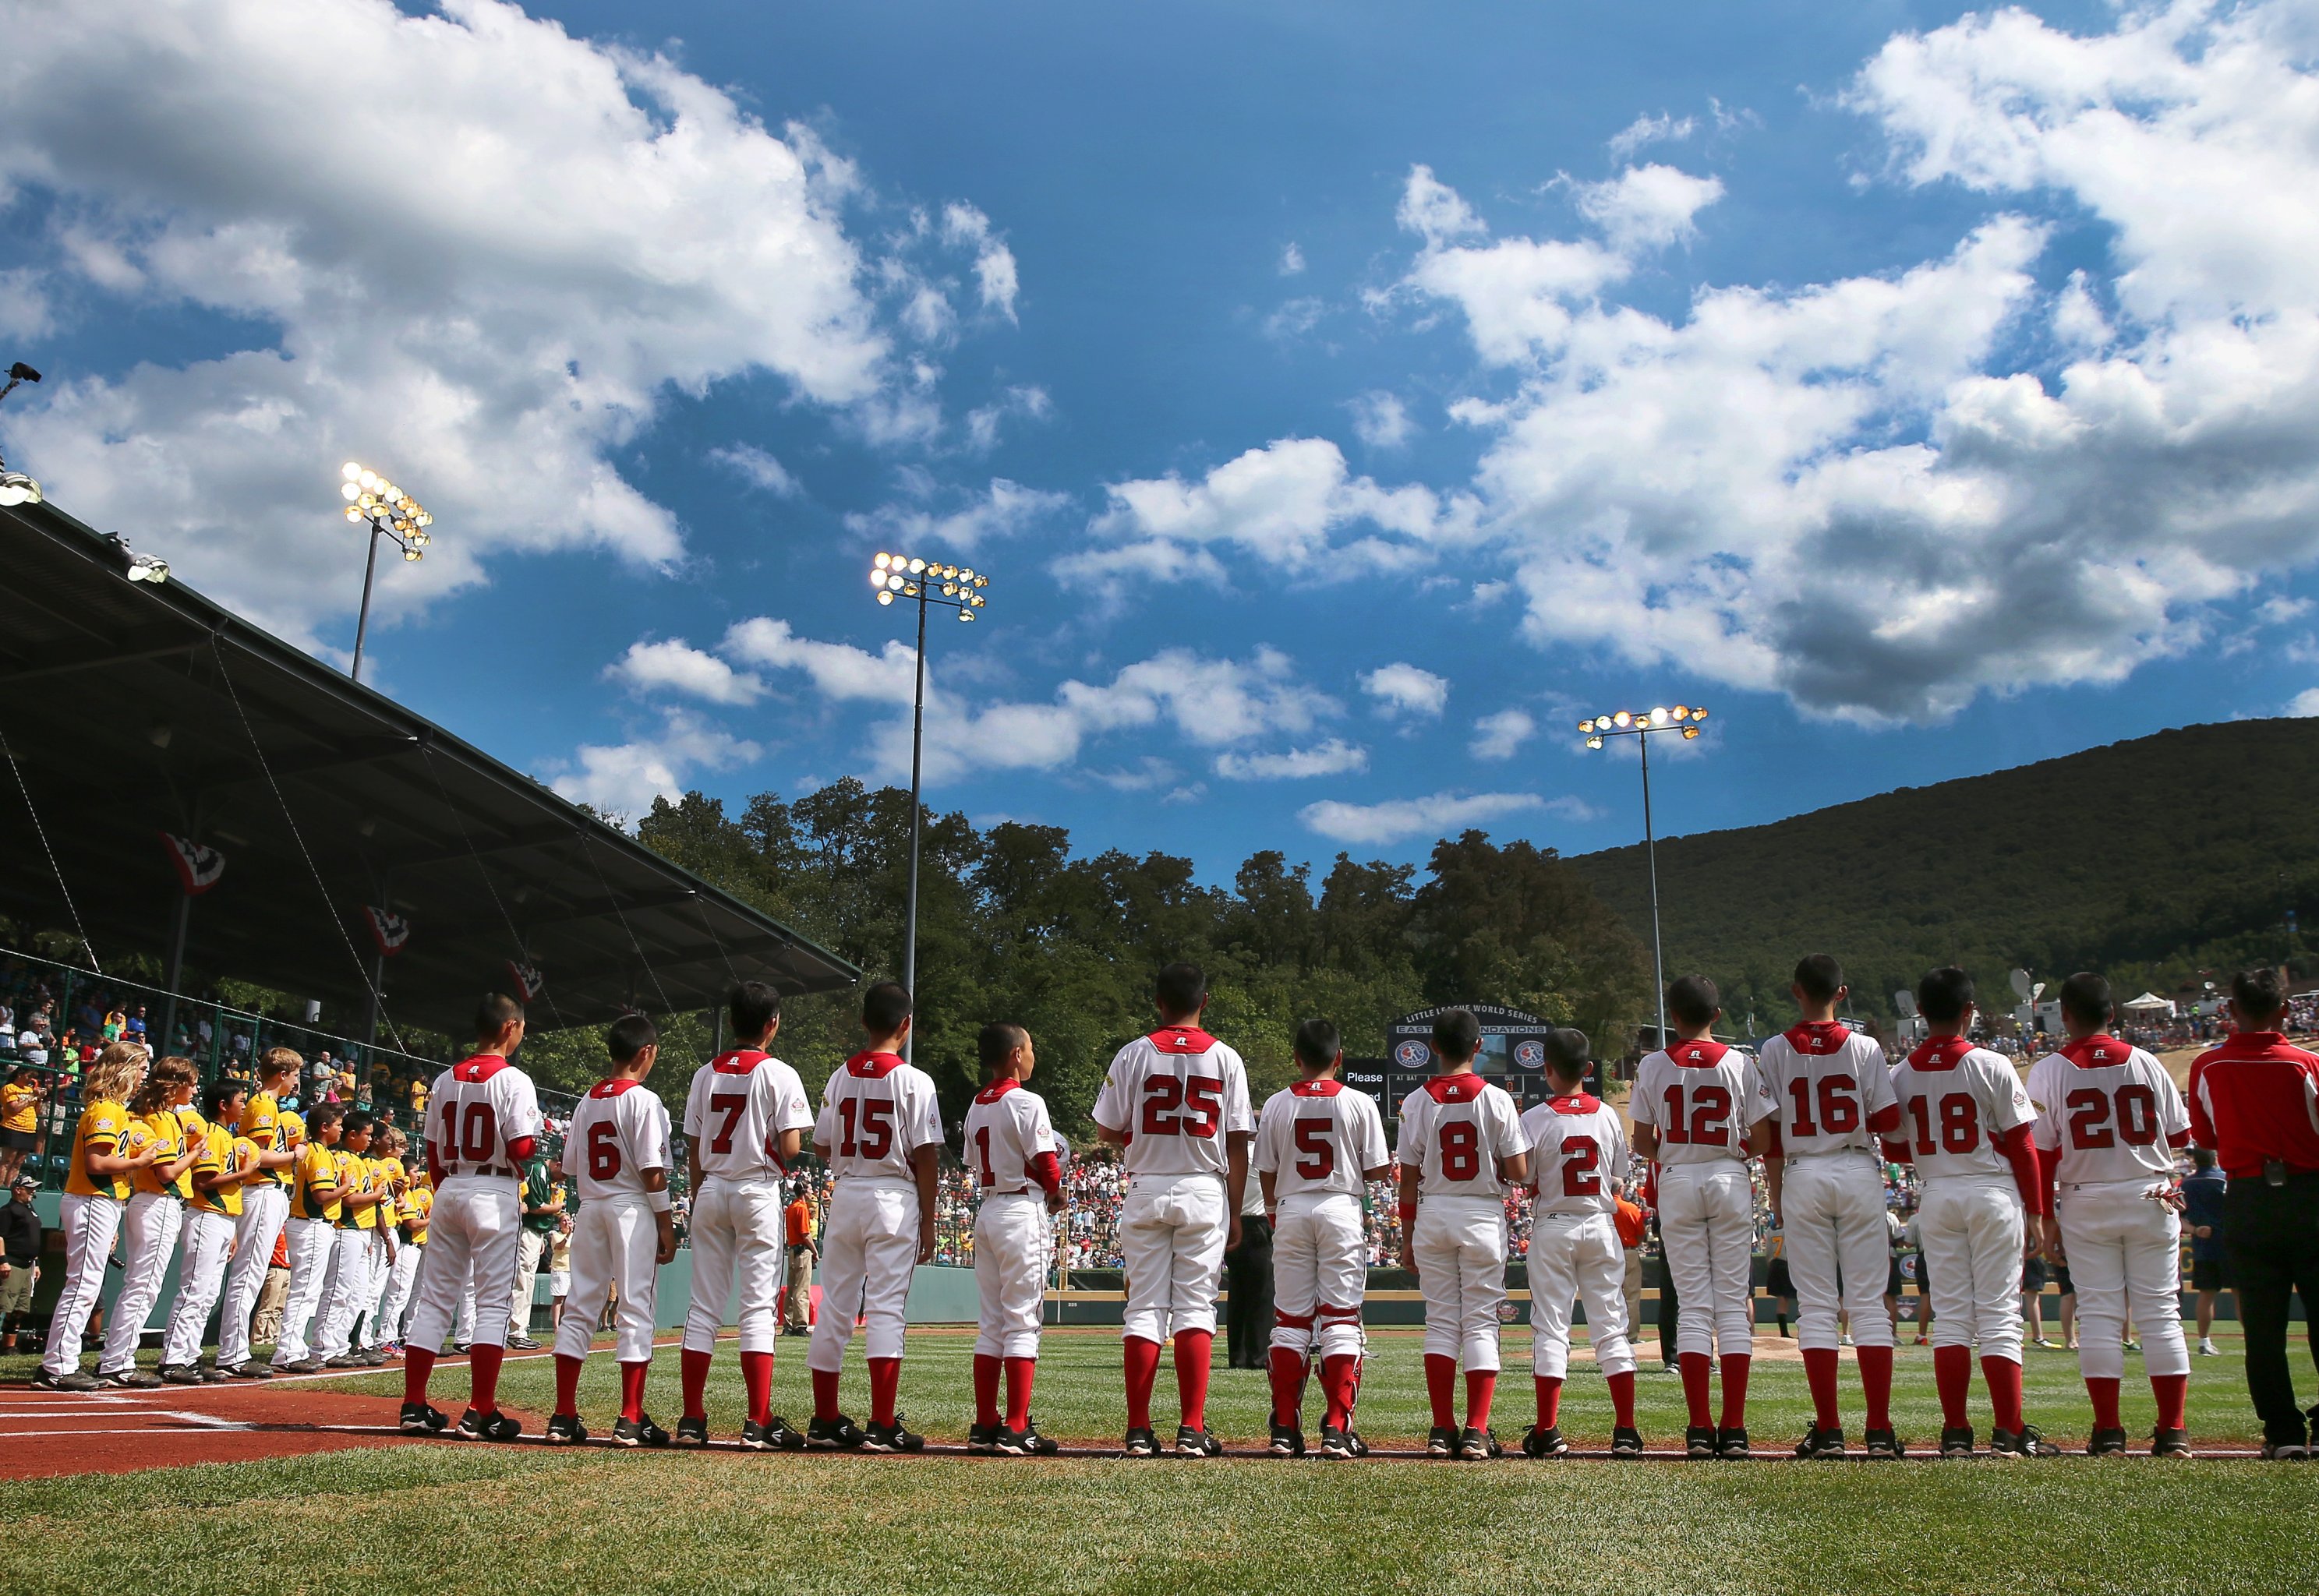 U.S. Little League champs Jackie Robinson West accused of cheating